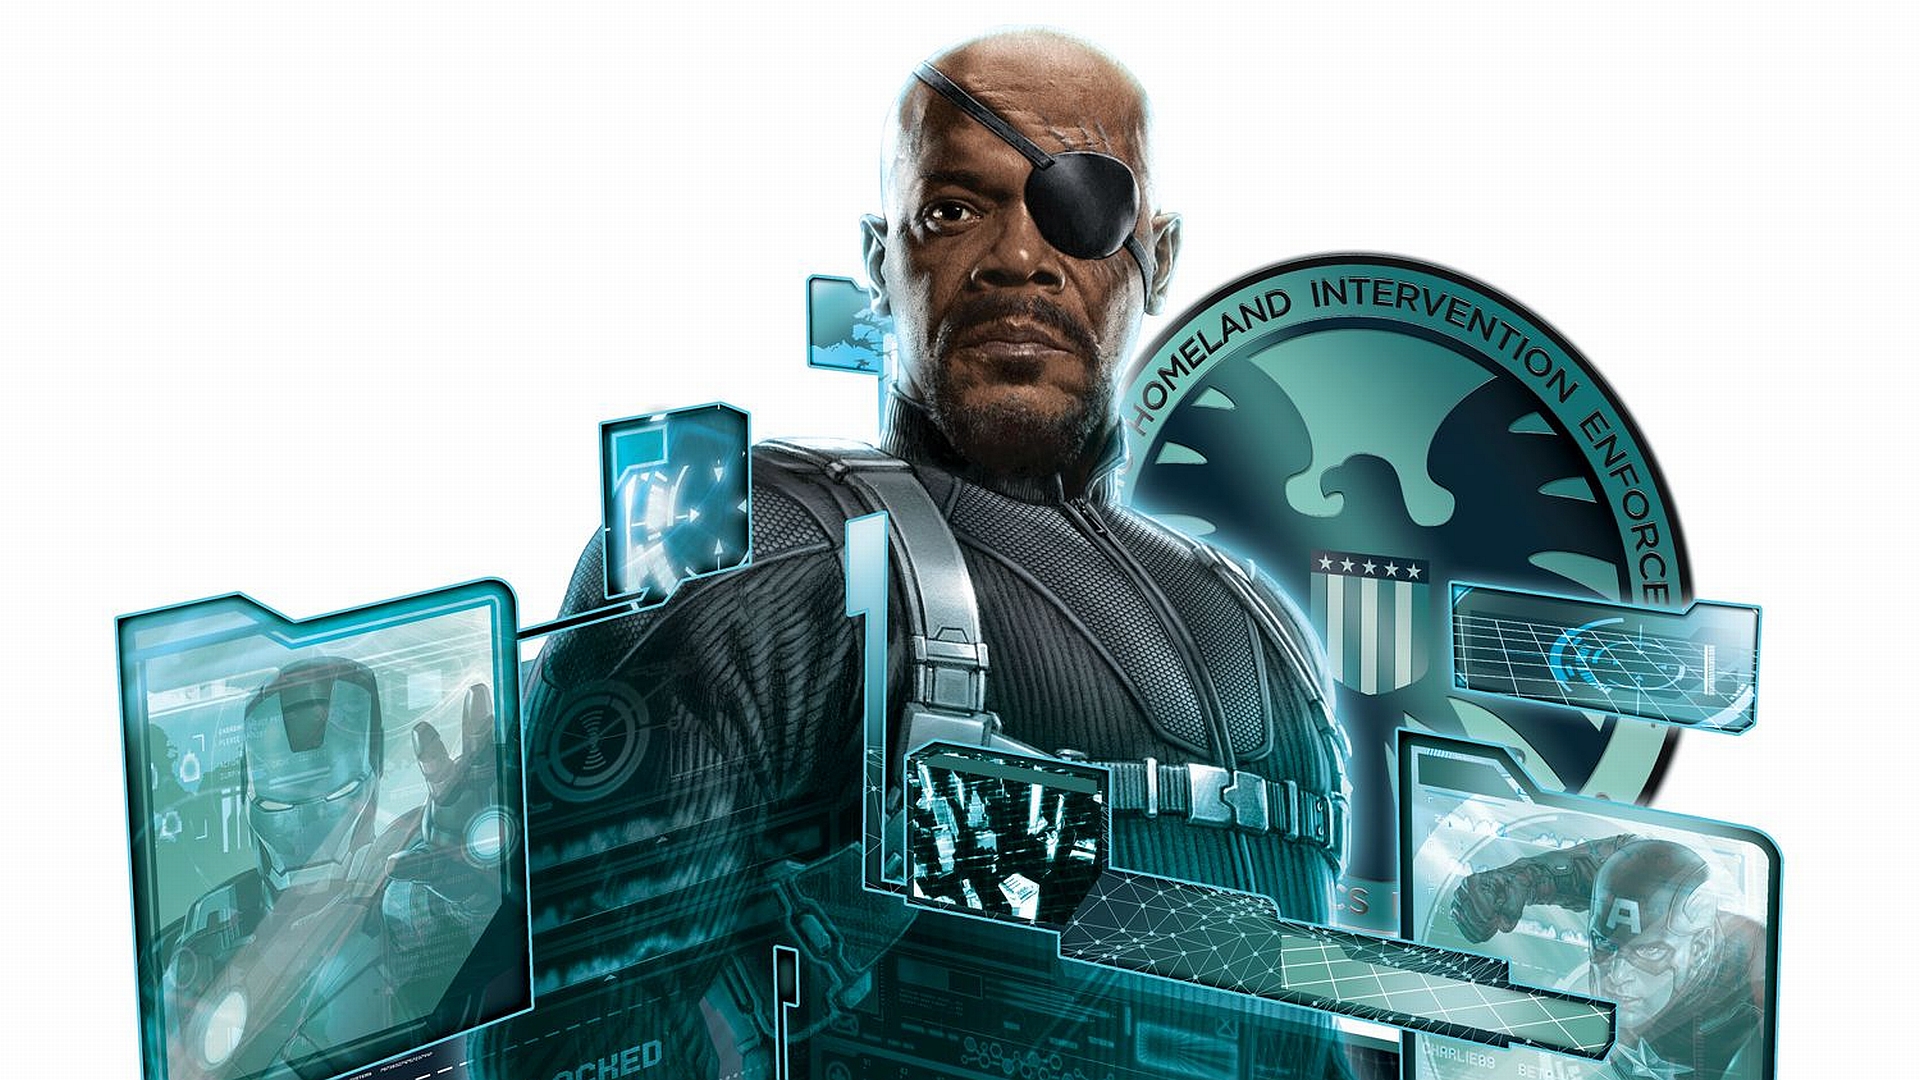 Nick Fury assembling the Avengers in a thrilling comic book scene.